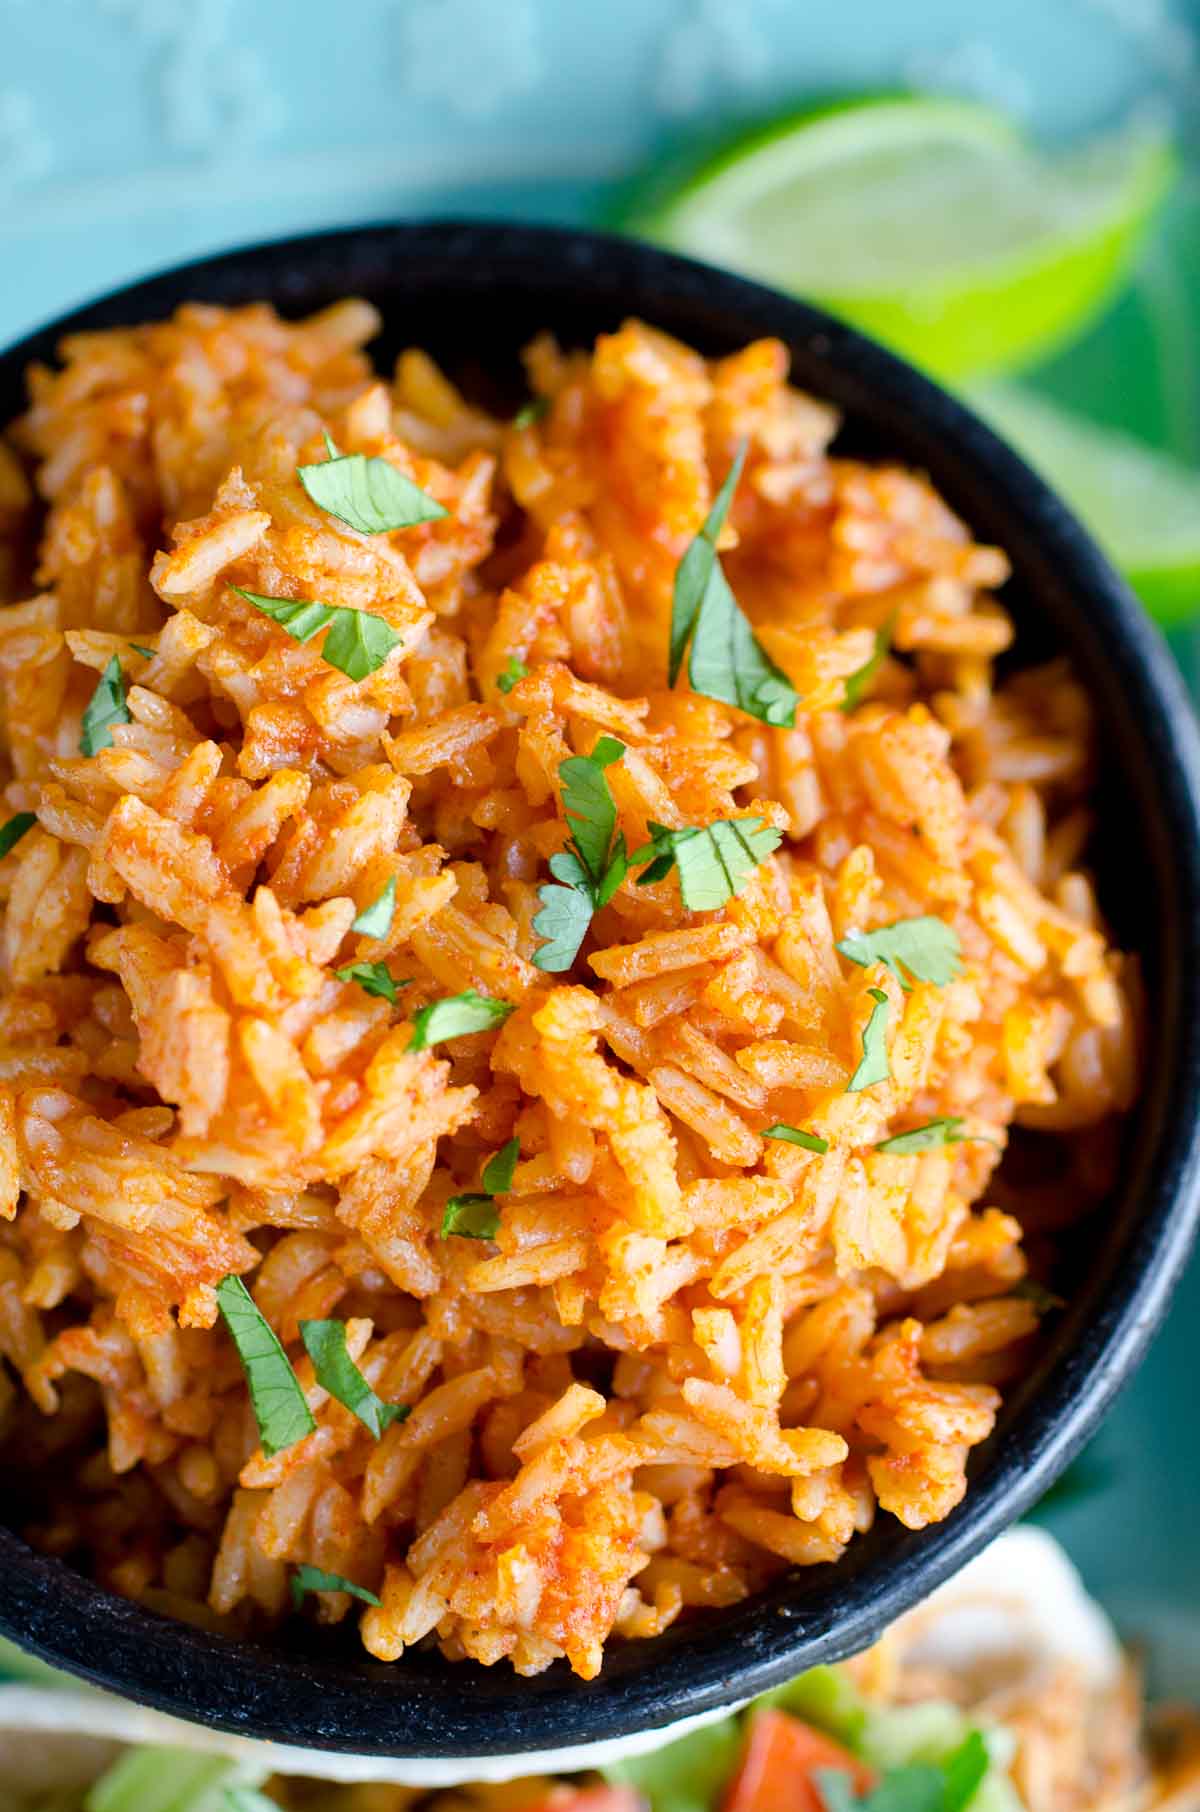 How to Make Mexican Rice Recipe for all your Tex-Mex meals!